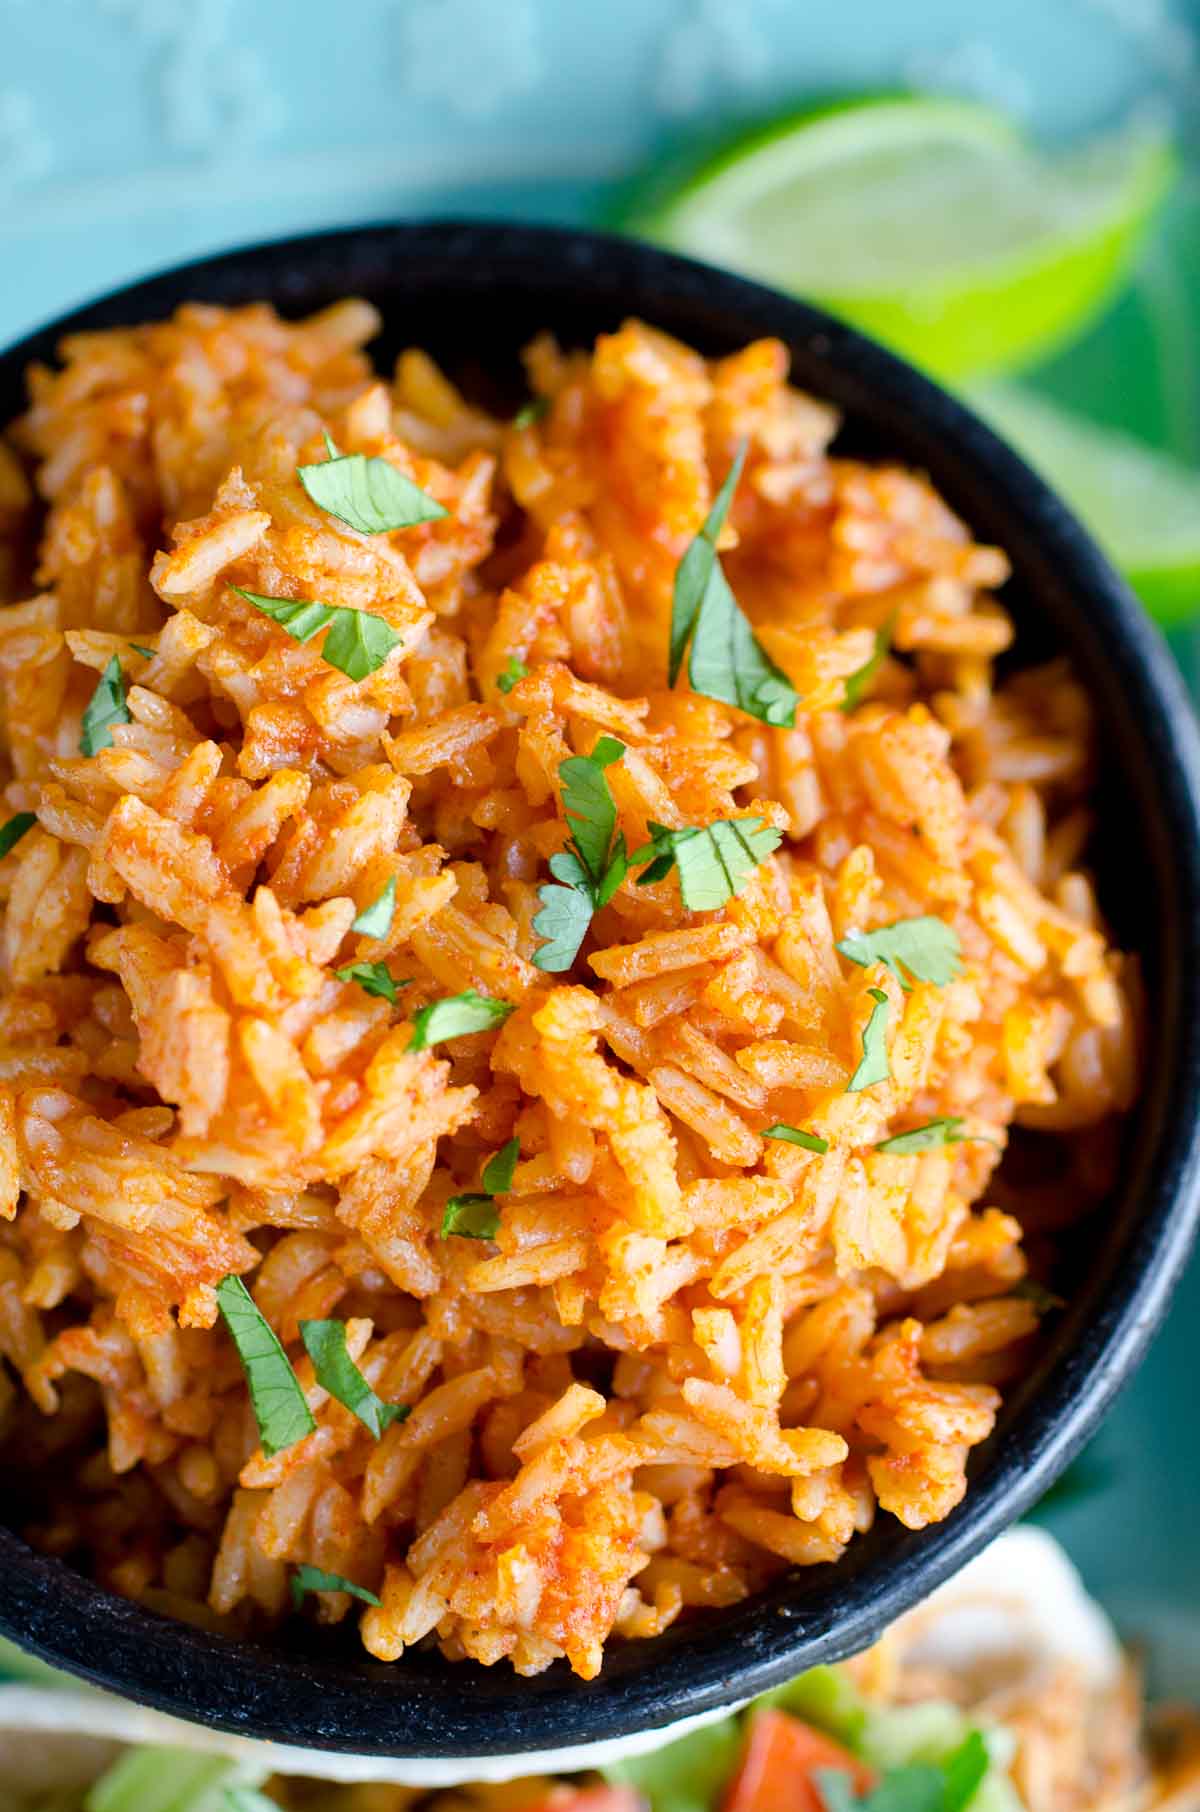 How to Make Mexican Rice Recipe for all your Tex-Mex meals!